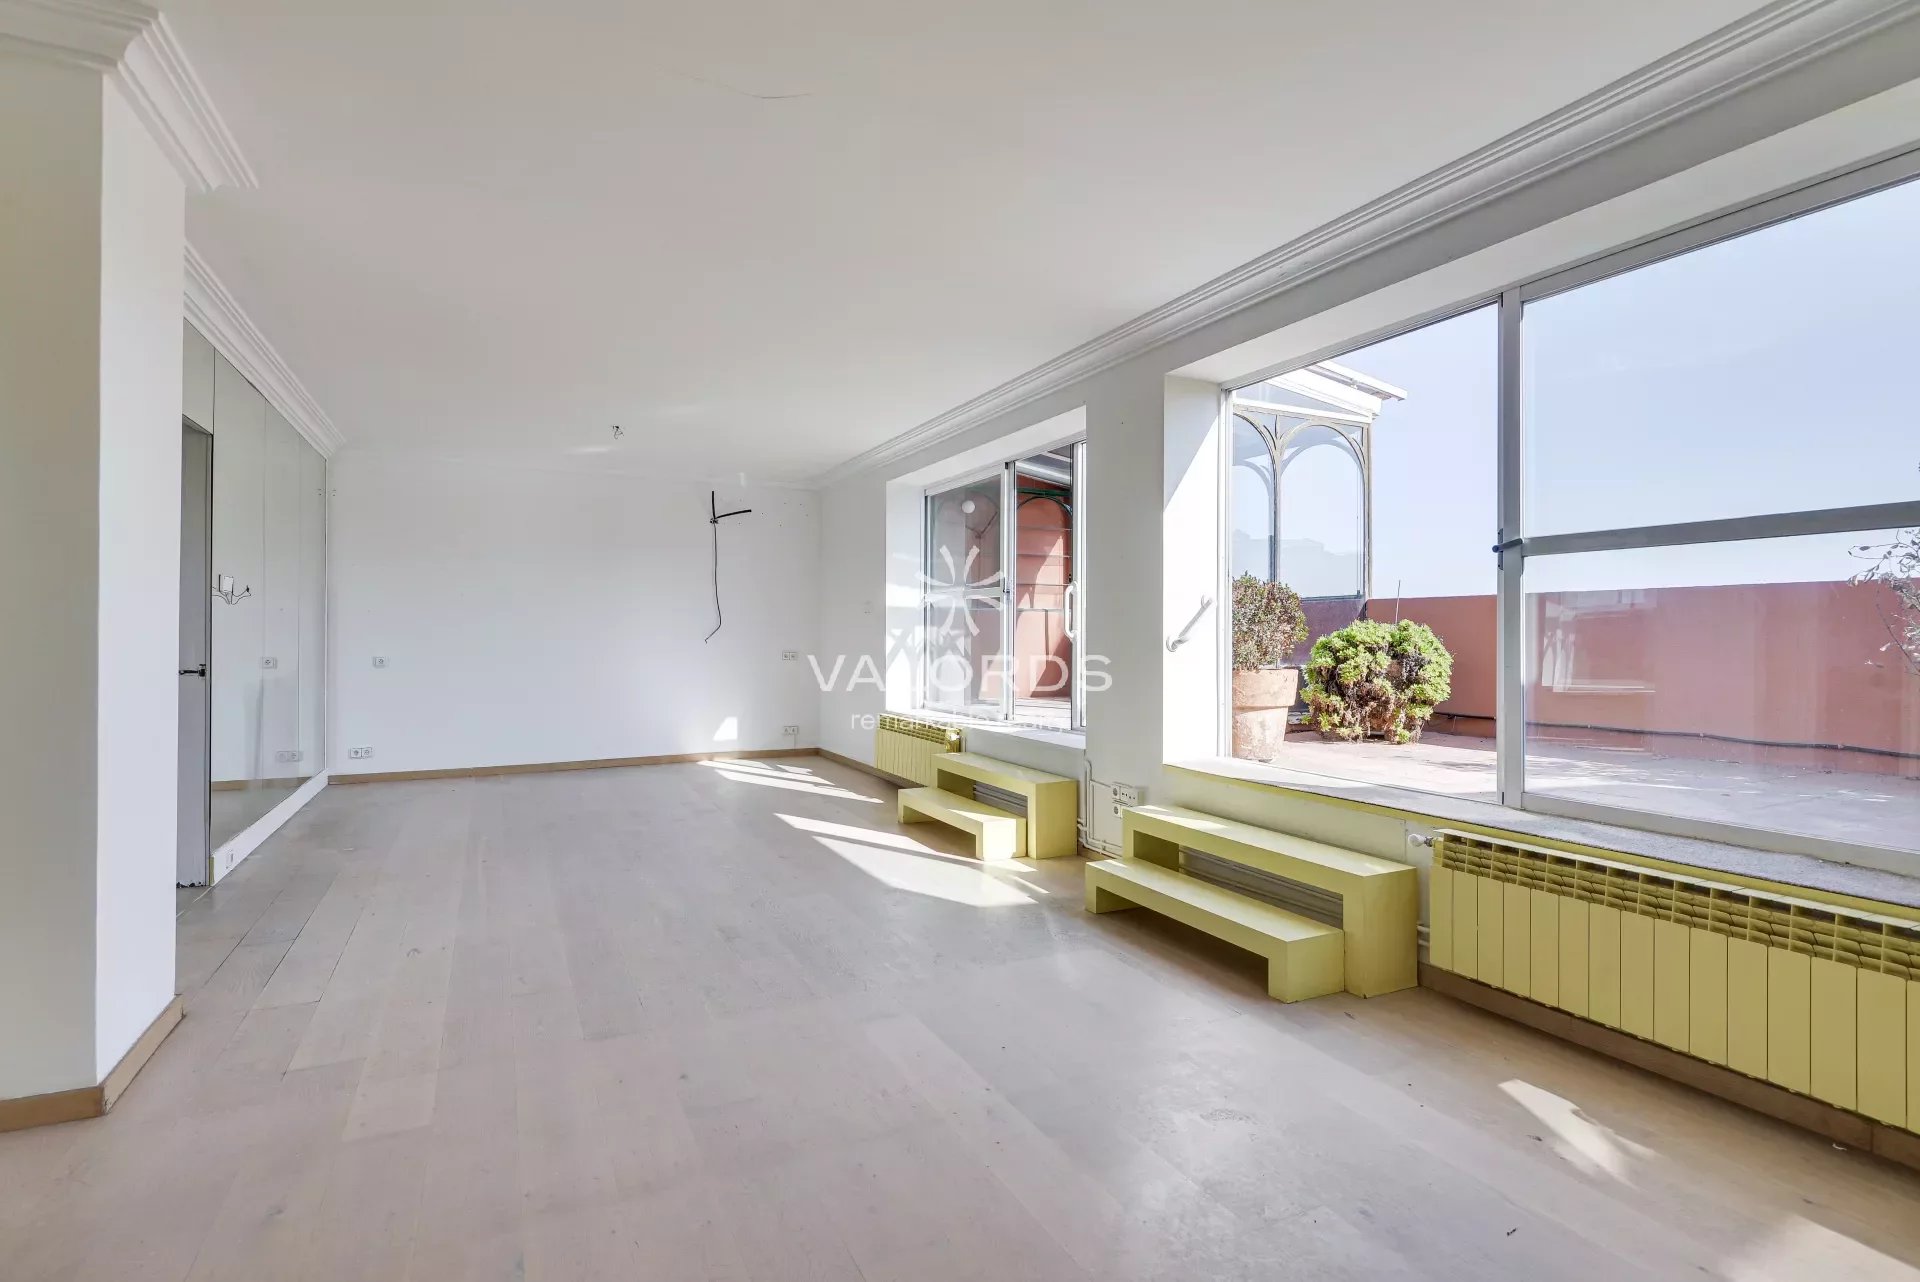 Barcelone - Sant Gervasi Galvany - Penthouse 345 m2 - 6 chambres - picture 3 title=